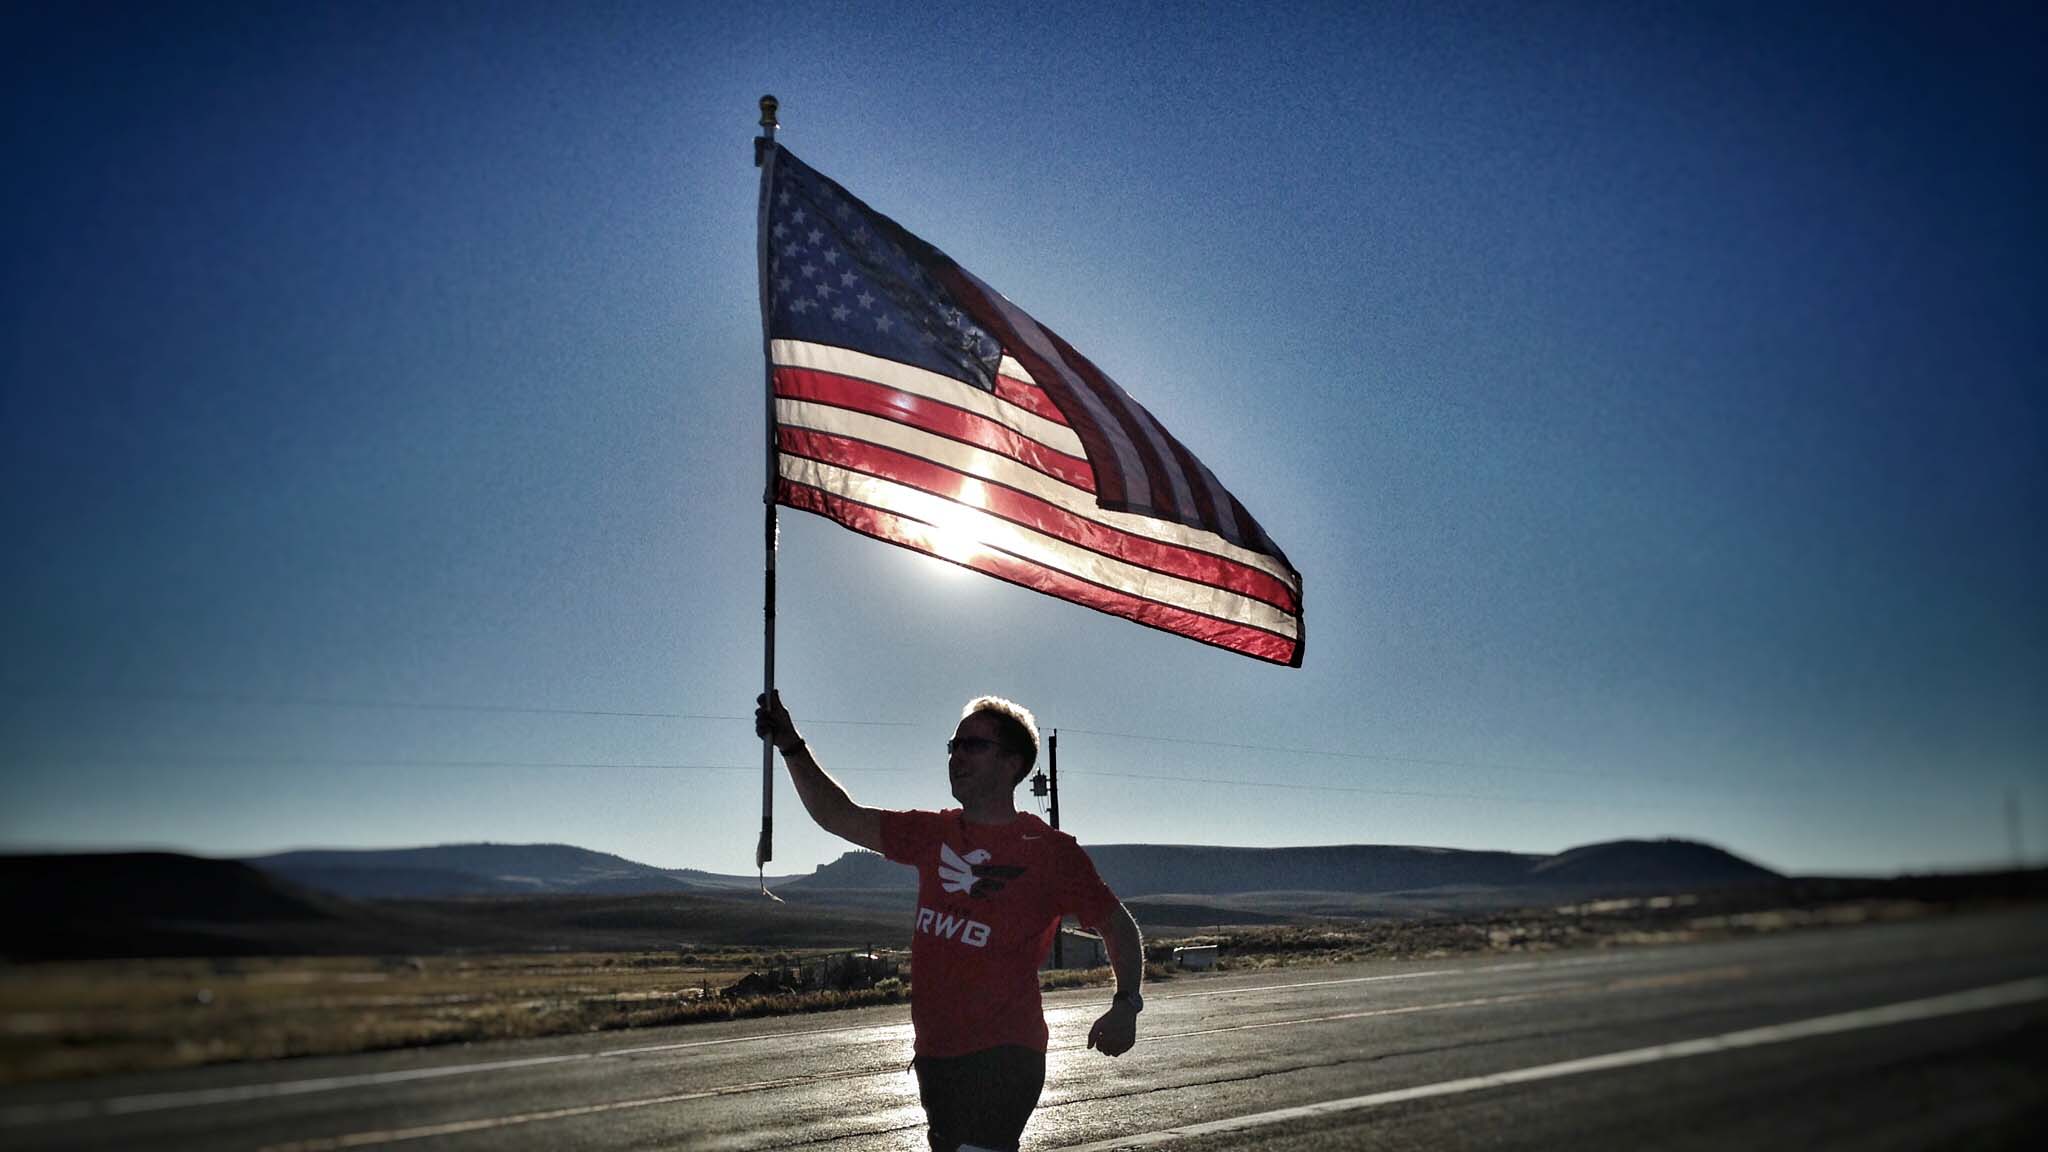 Team Red White and Blue’s ‘Old Glory Relay’ Returns